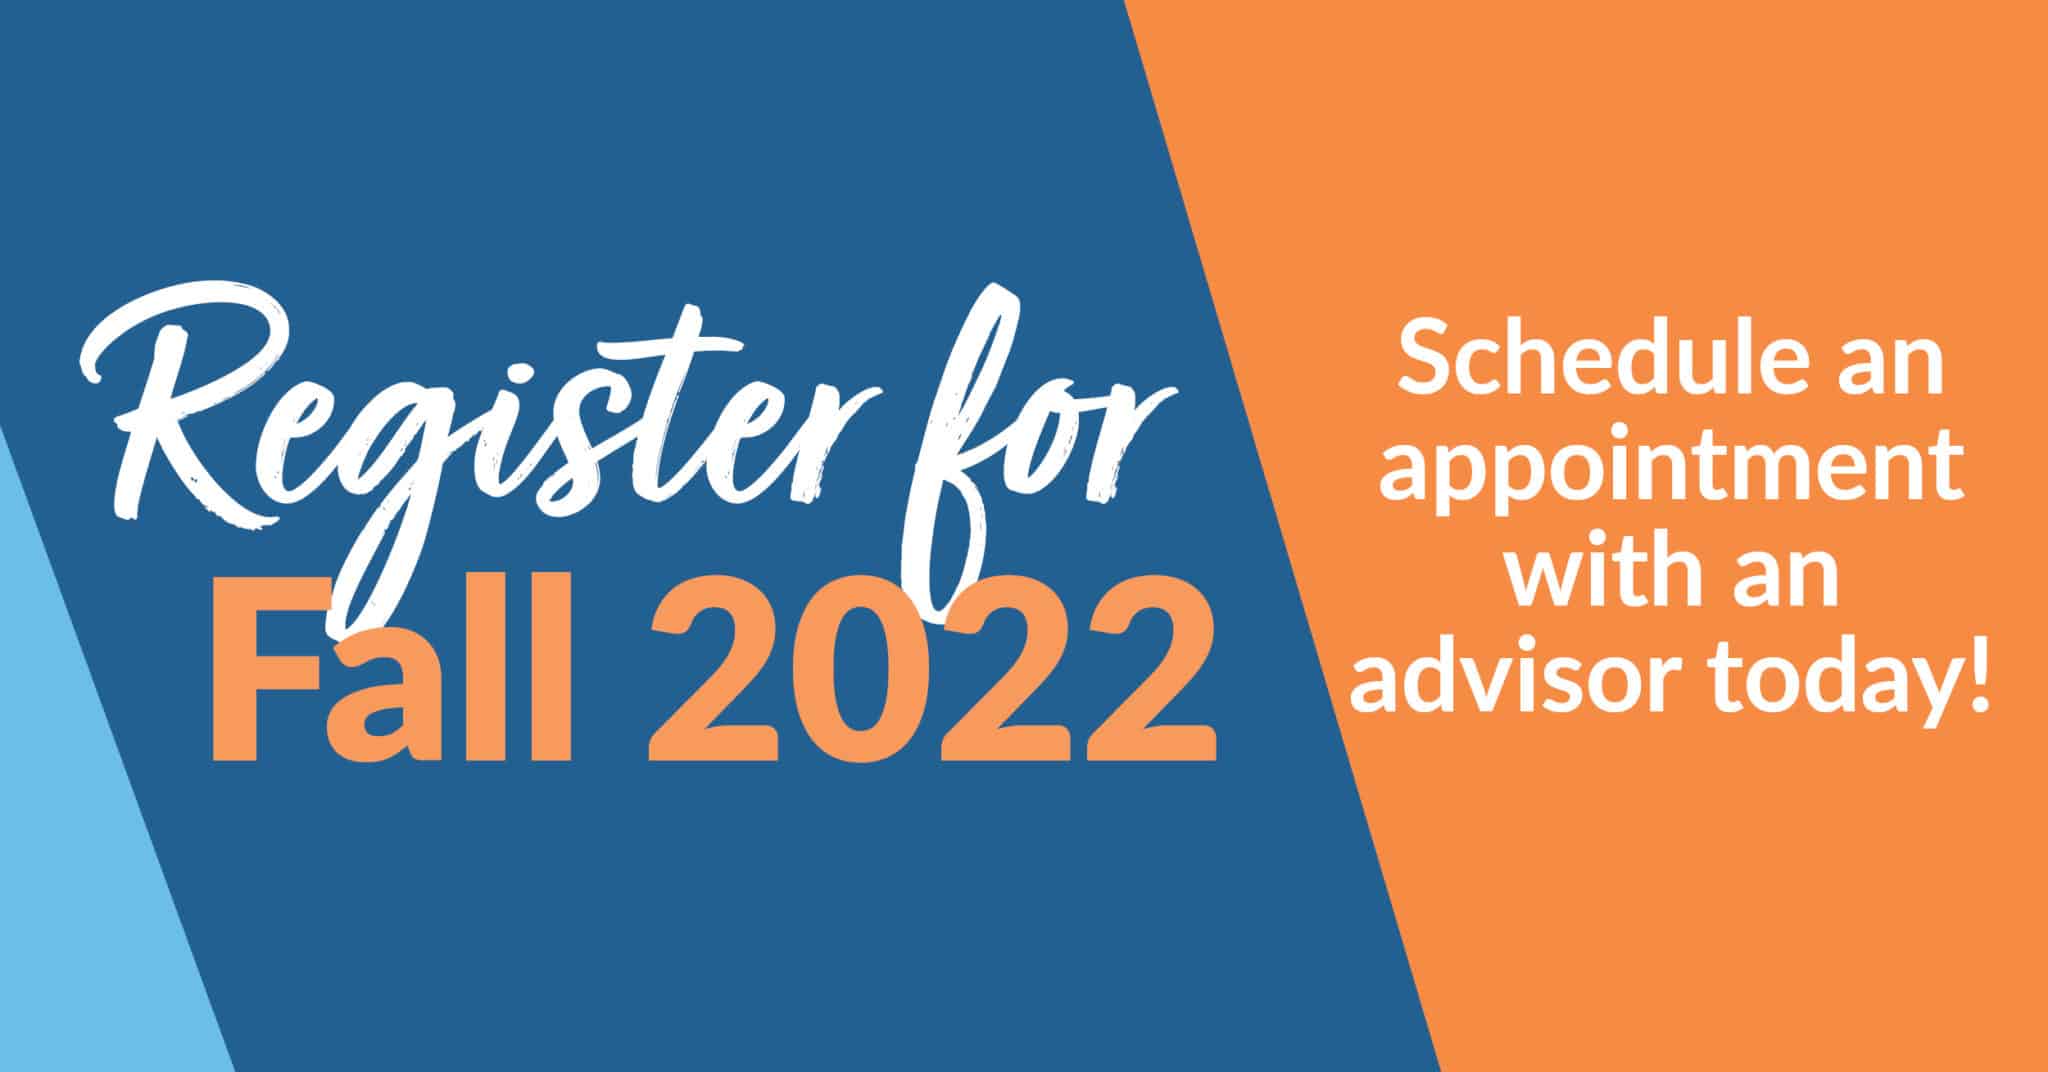 It’s not too late to register for Fall 2022 classes